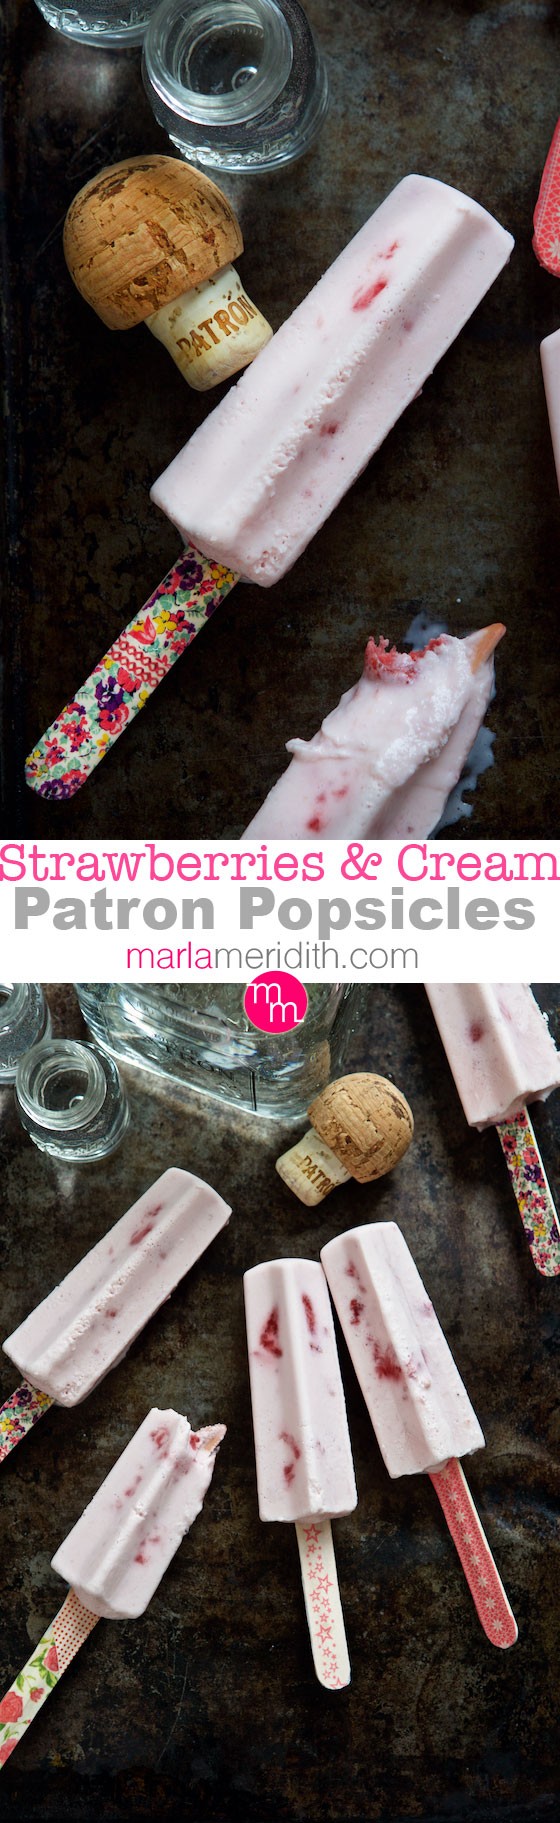 Strawberries & Cream Patron Popsicles | Serve these at your next outdoor party! MarlaMeridith.com ( @marlameridith )